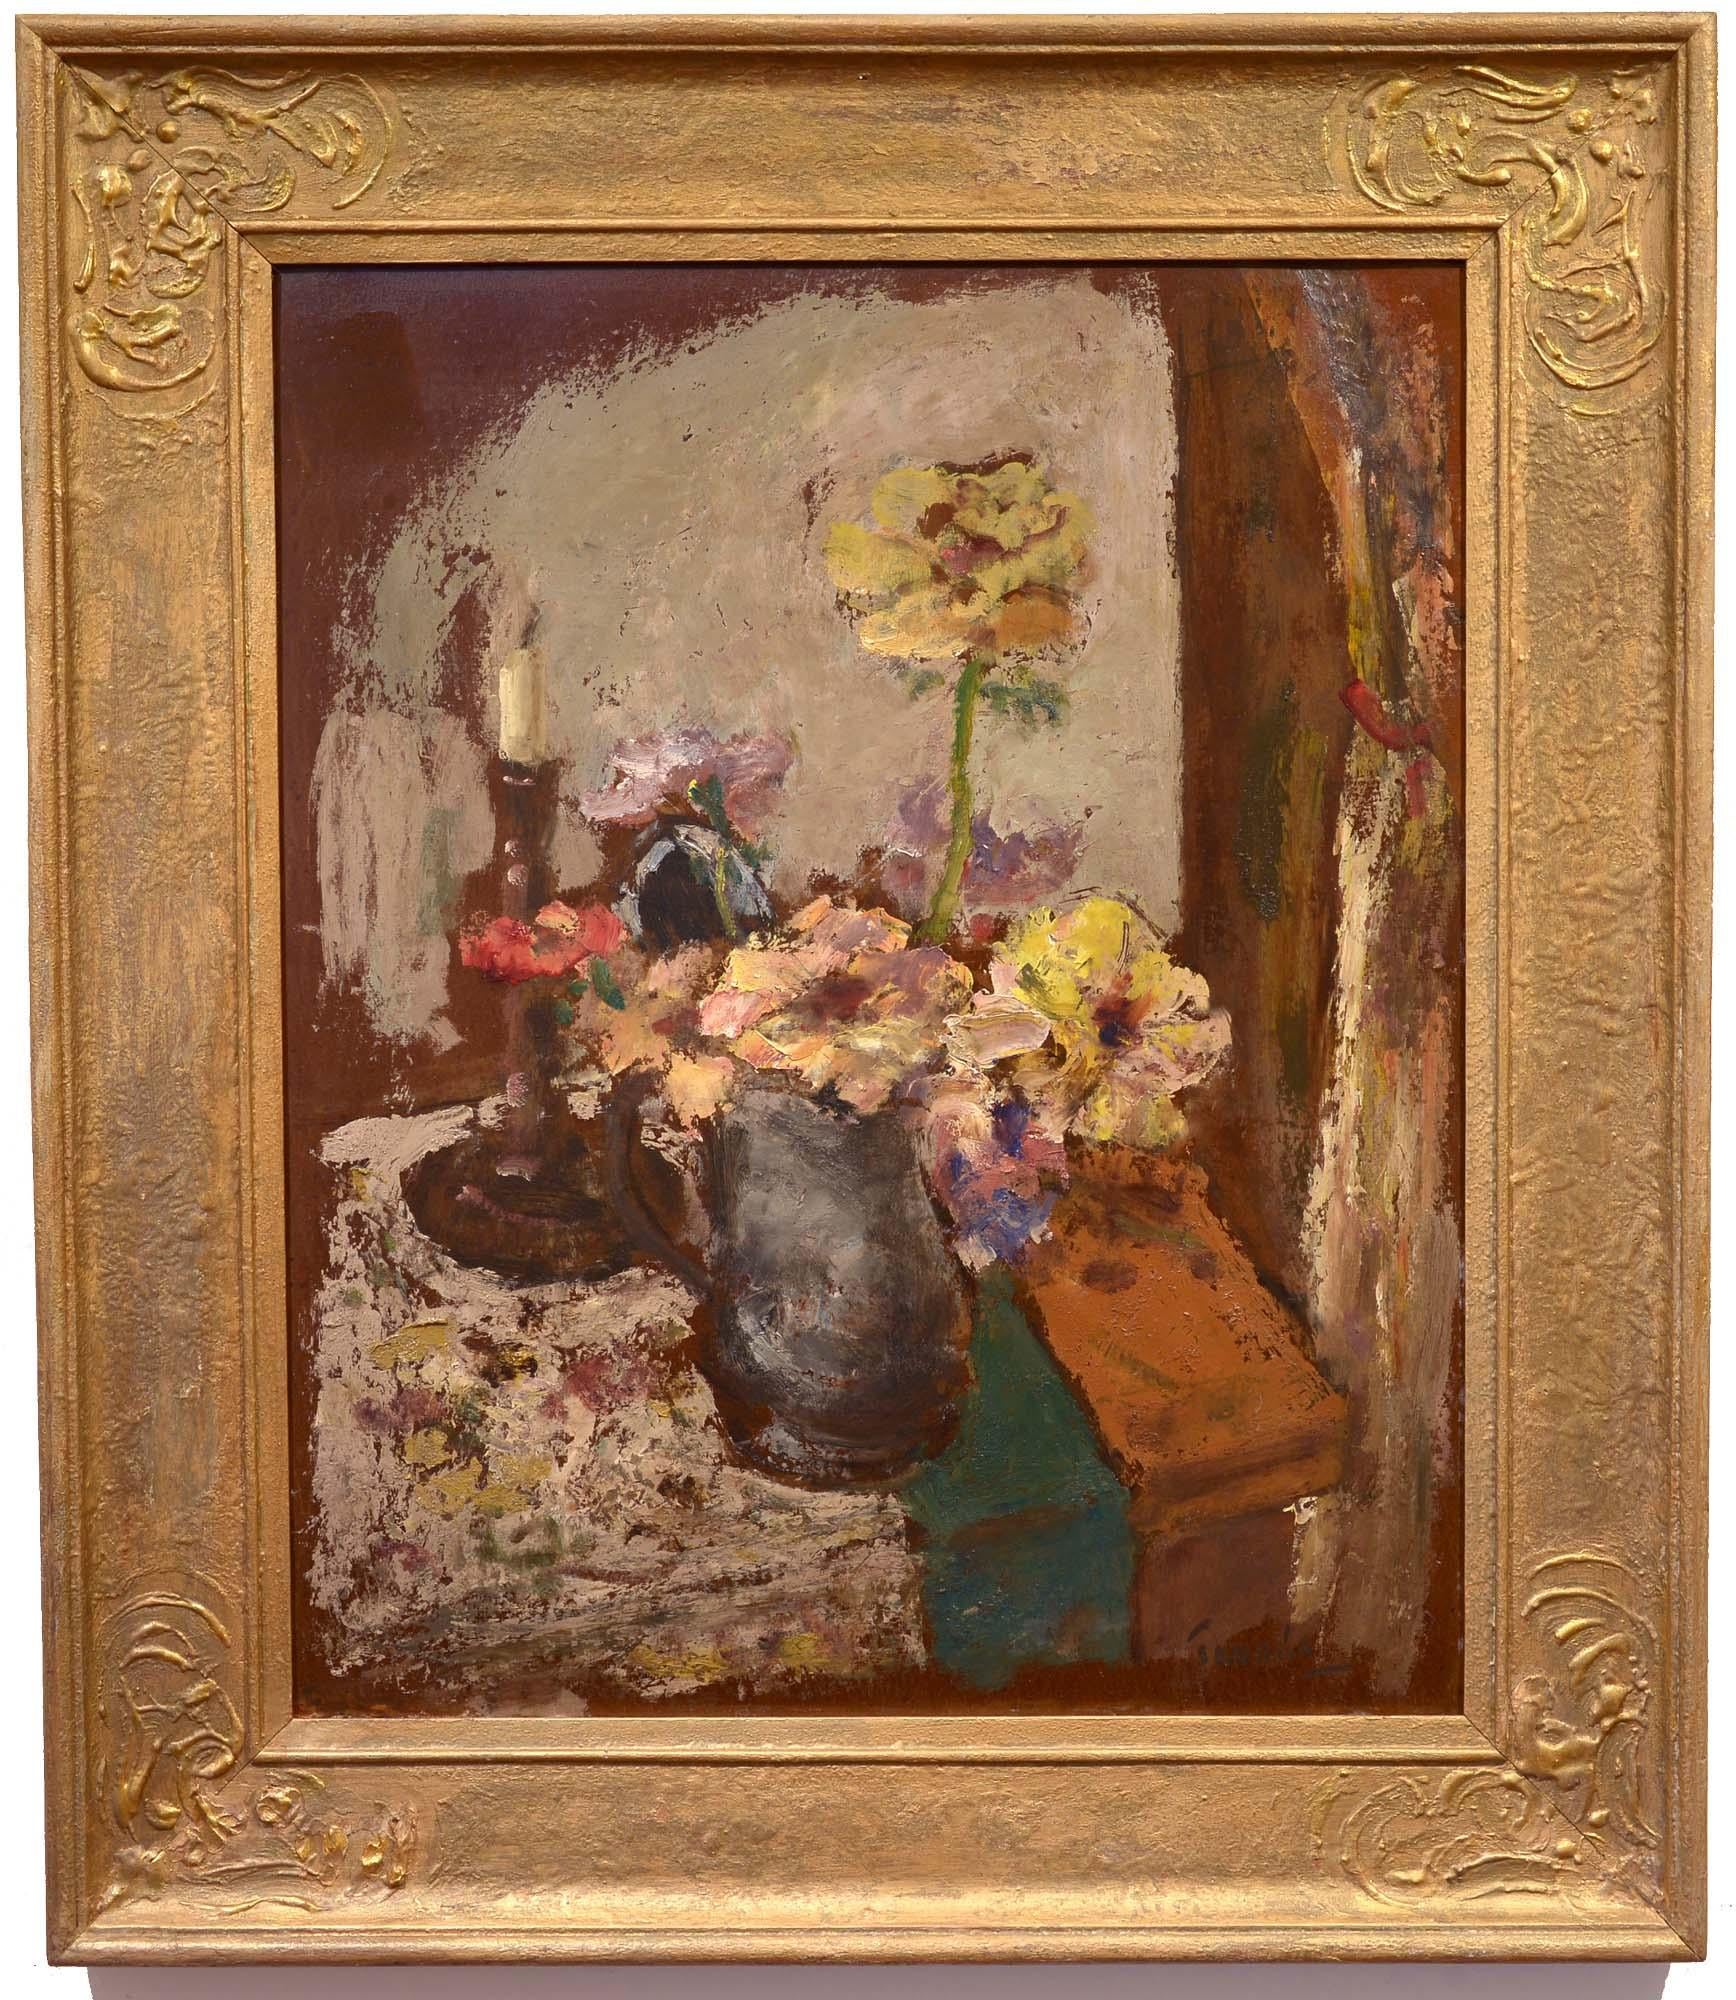 Tabletop Still Life, 20th century Japanese, Impressionism, oil - Painting by Miematsu Tanabe